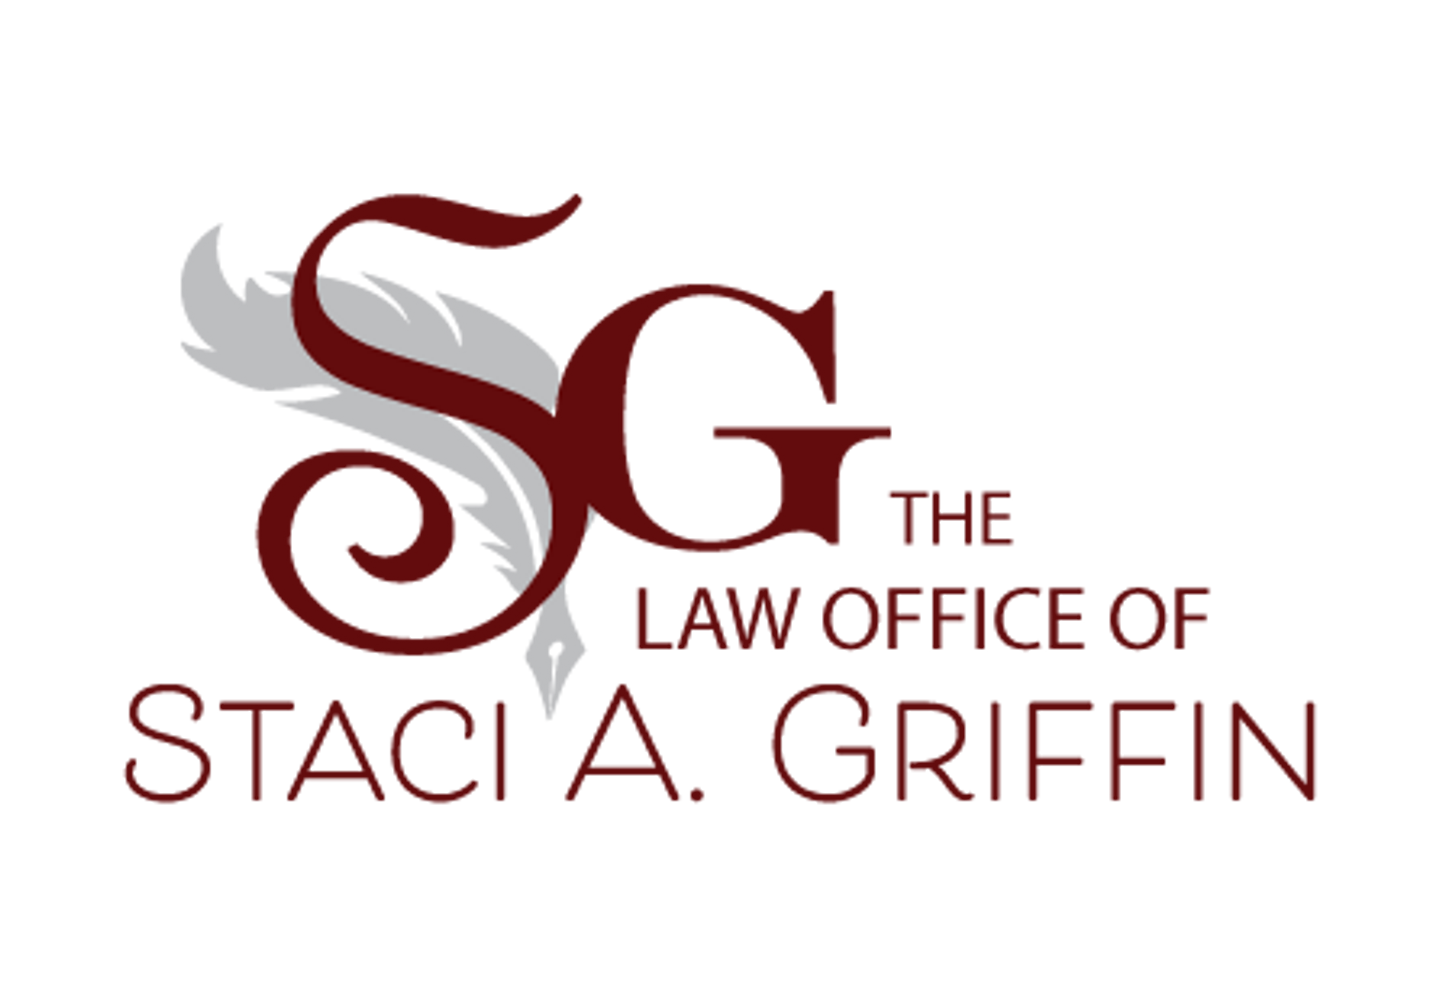 Staci A. Griffin law office logo